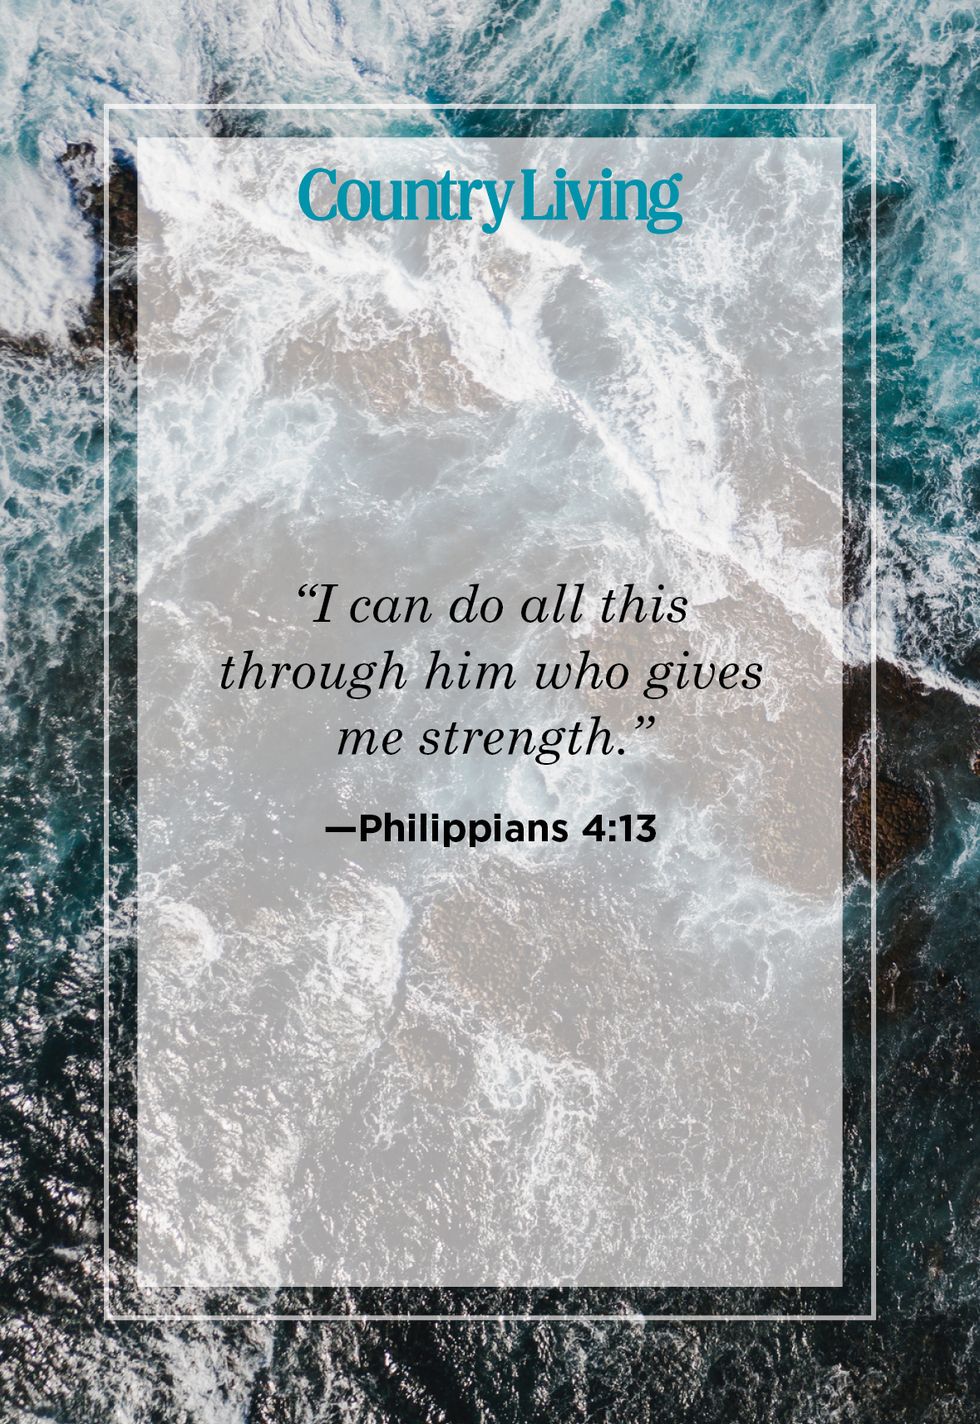 philippians 4, 13, bible verse about strength, over photo of turbulent ocean